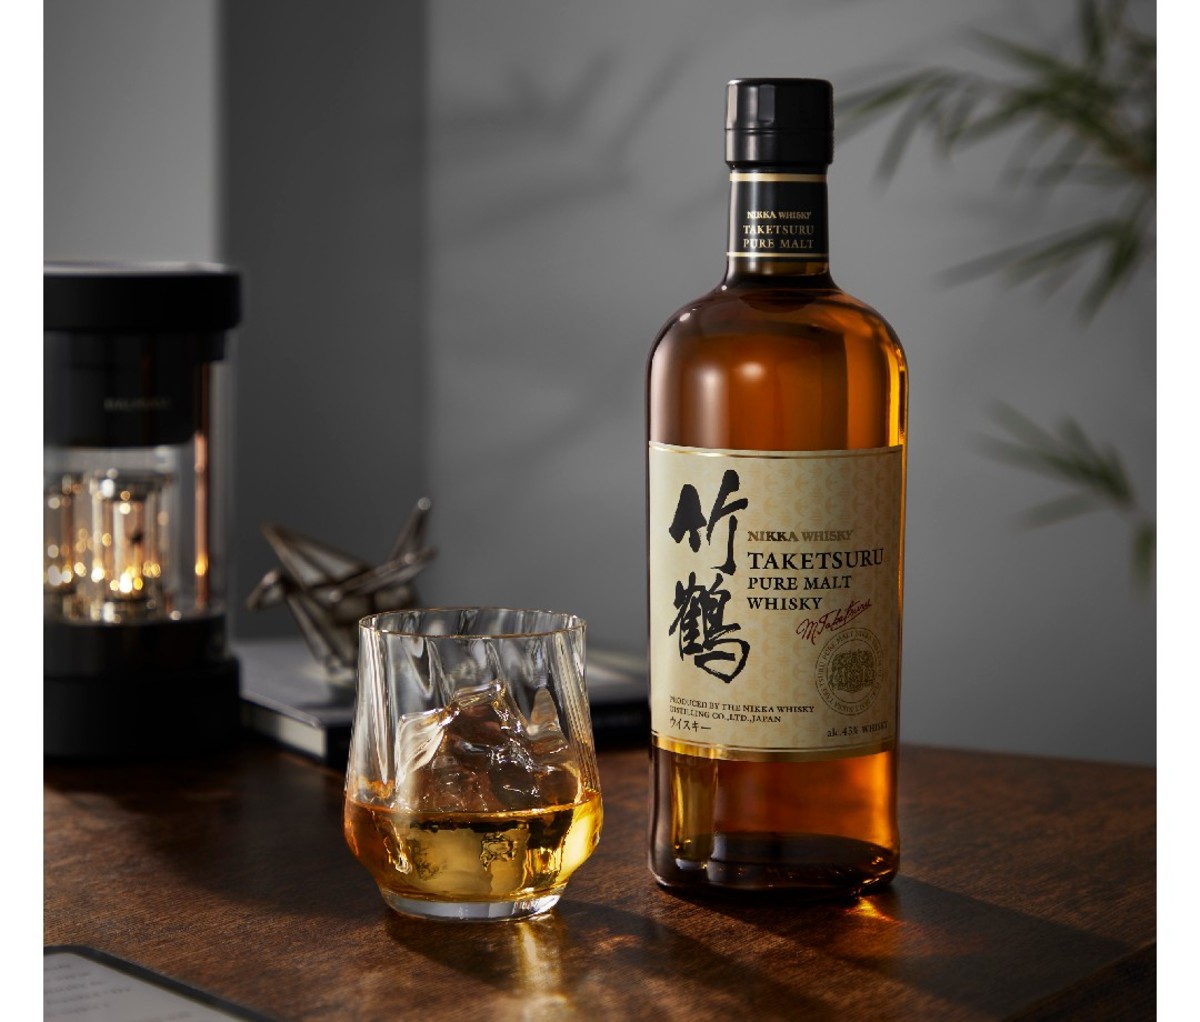 Bottle of Nikka-Taketsuru whisky on a bar with a glass of whisky beside it